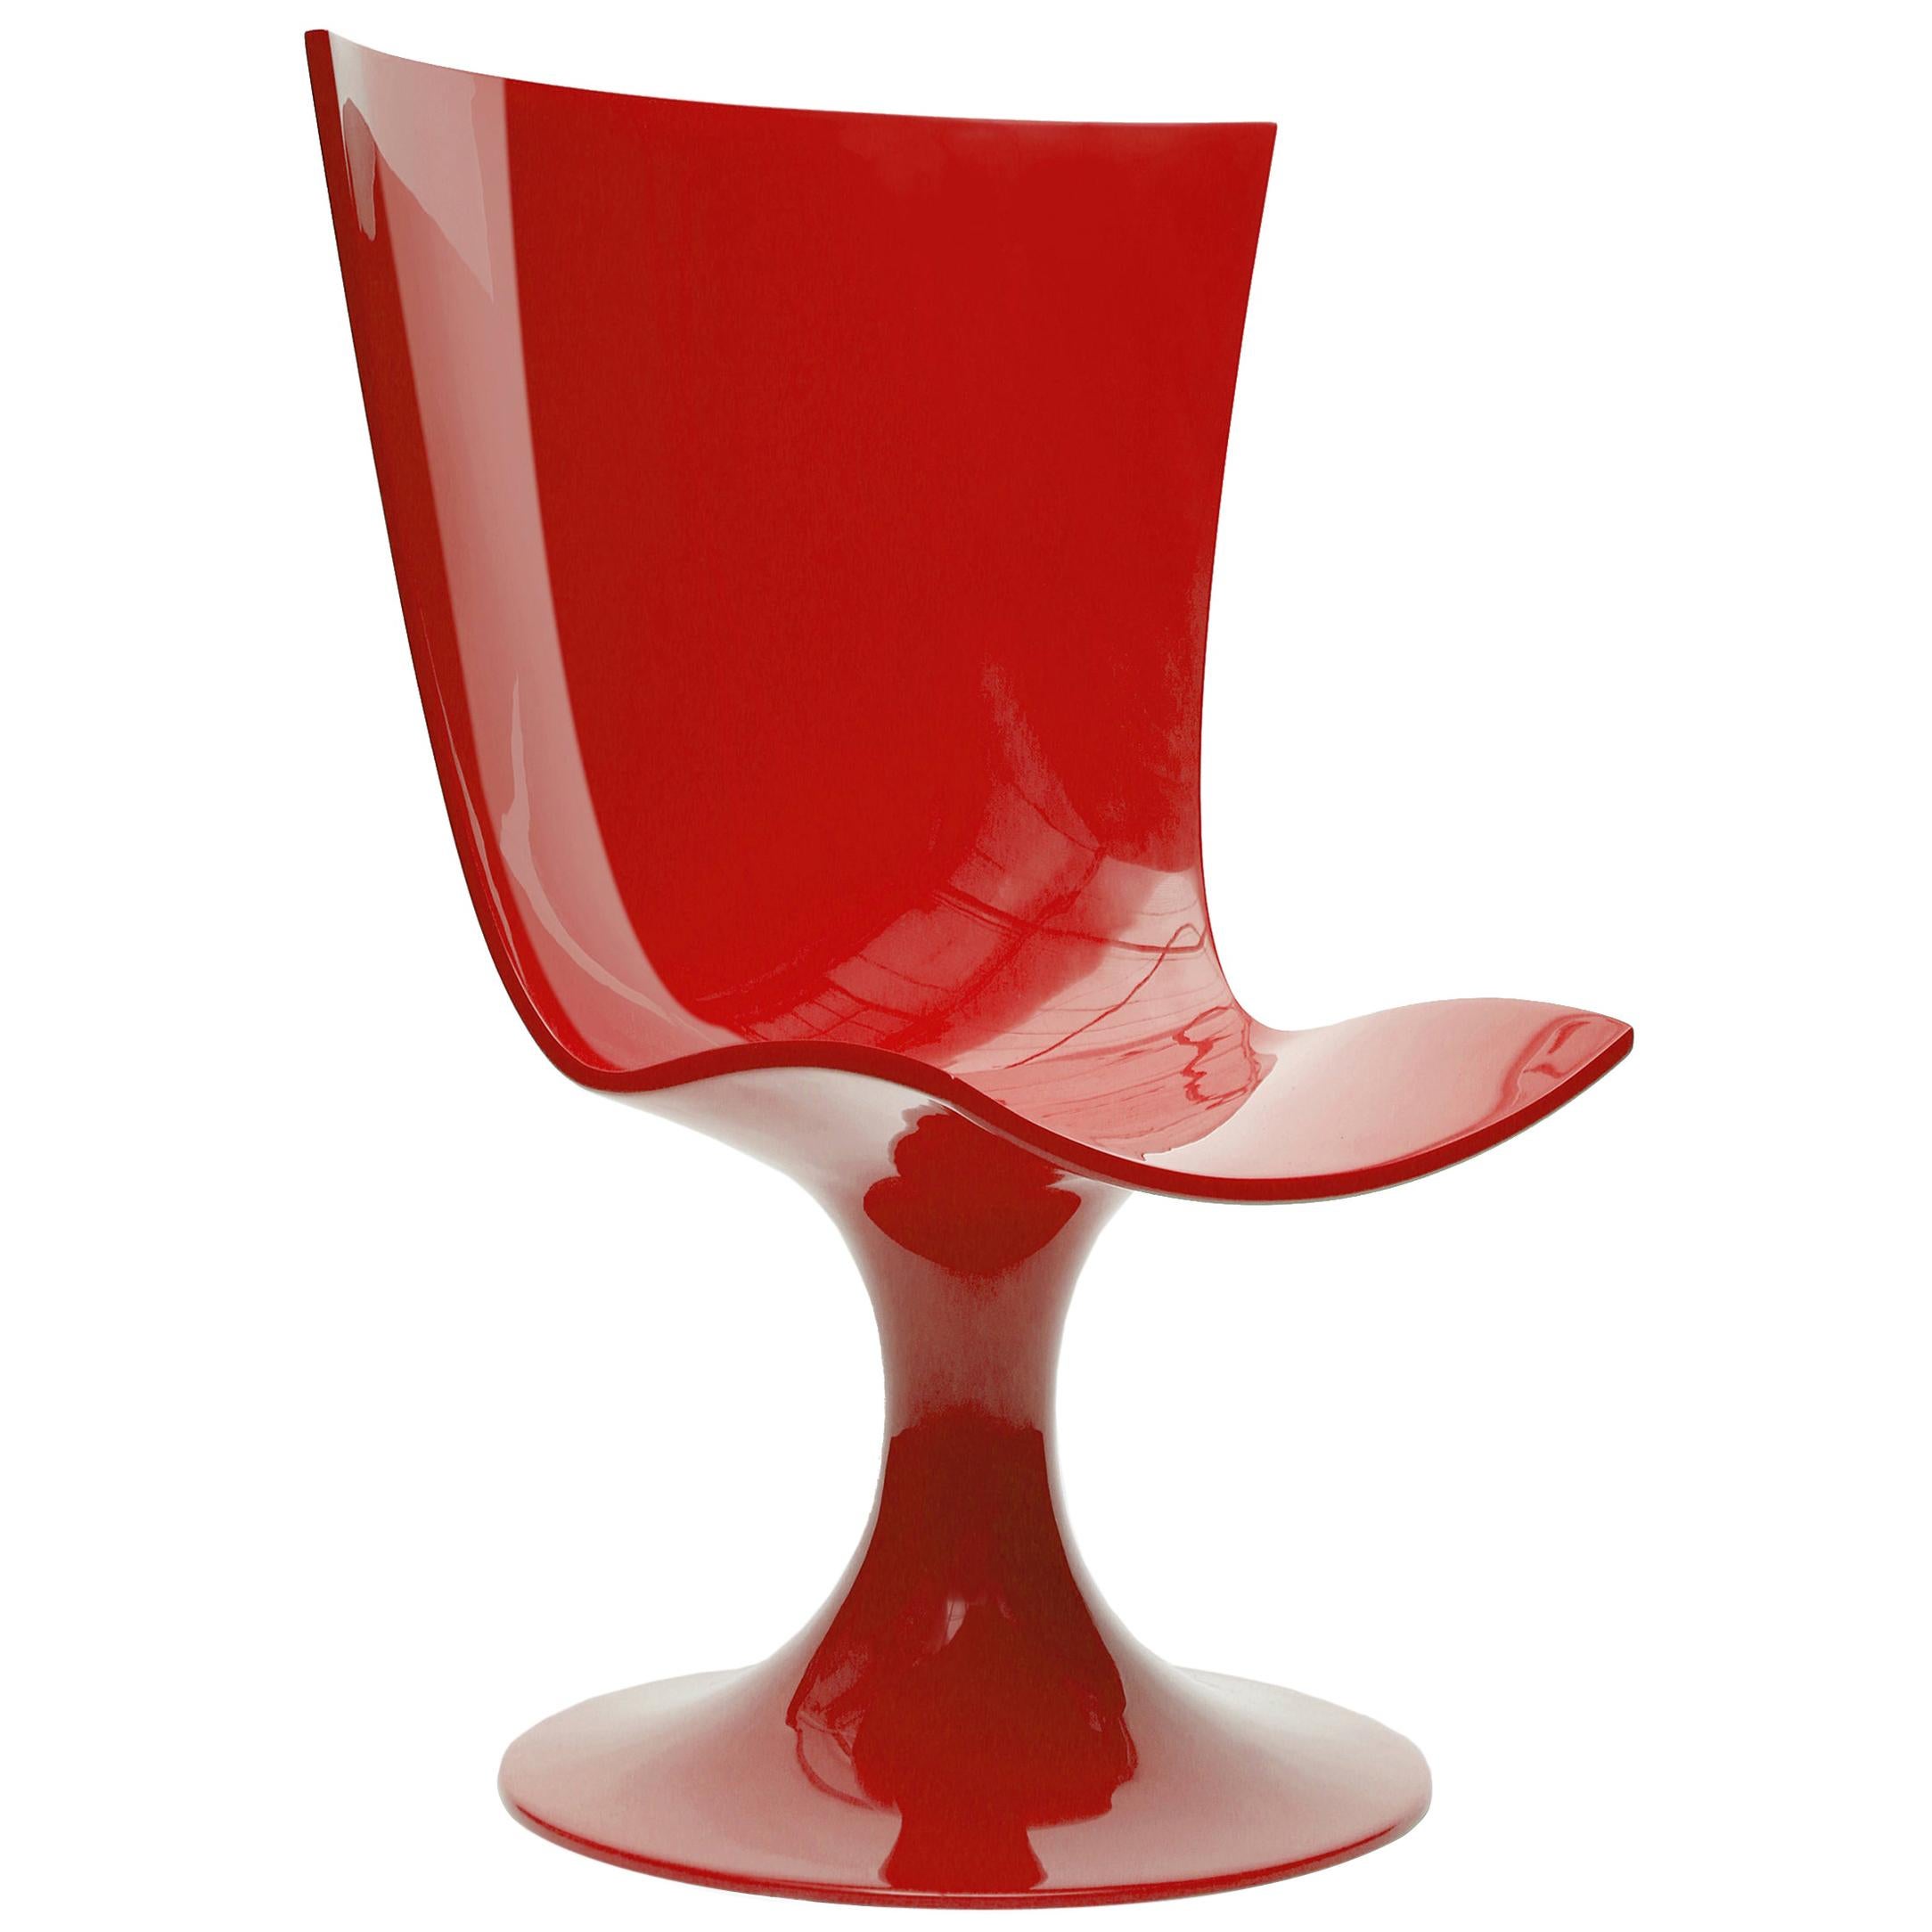 Santos, Imposing Seat, Sculptural Chair in Red by Joel Escalona For Sale